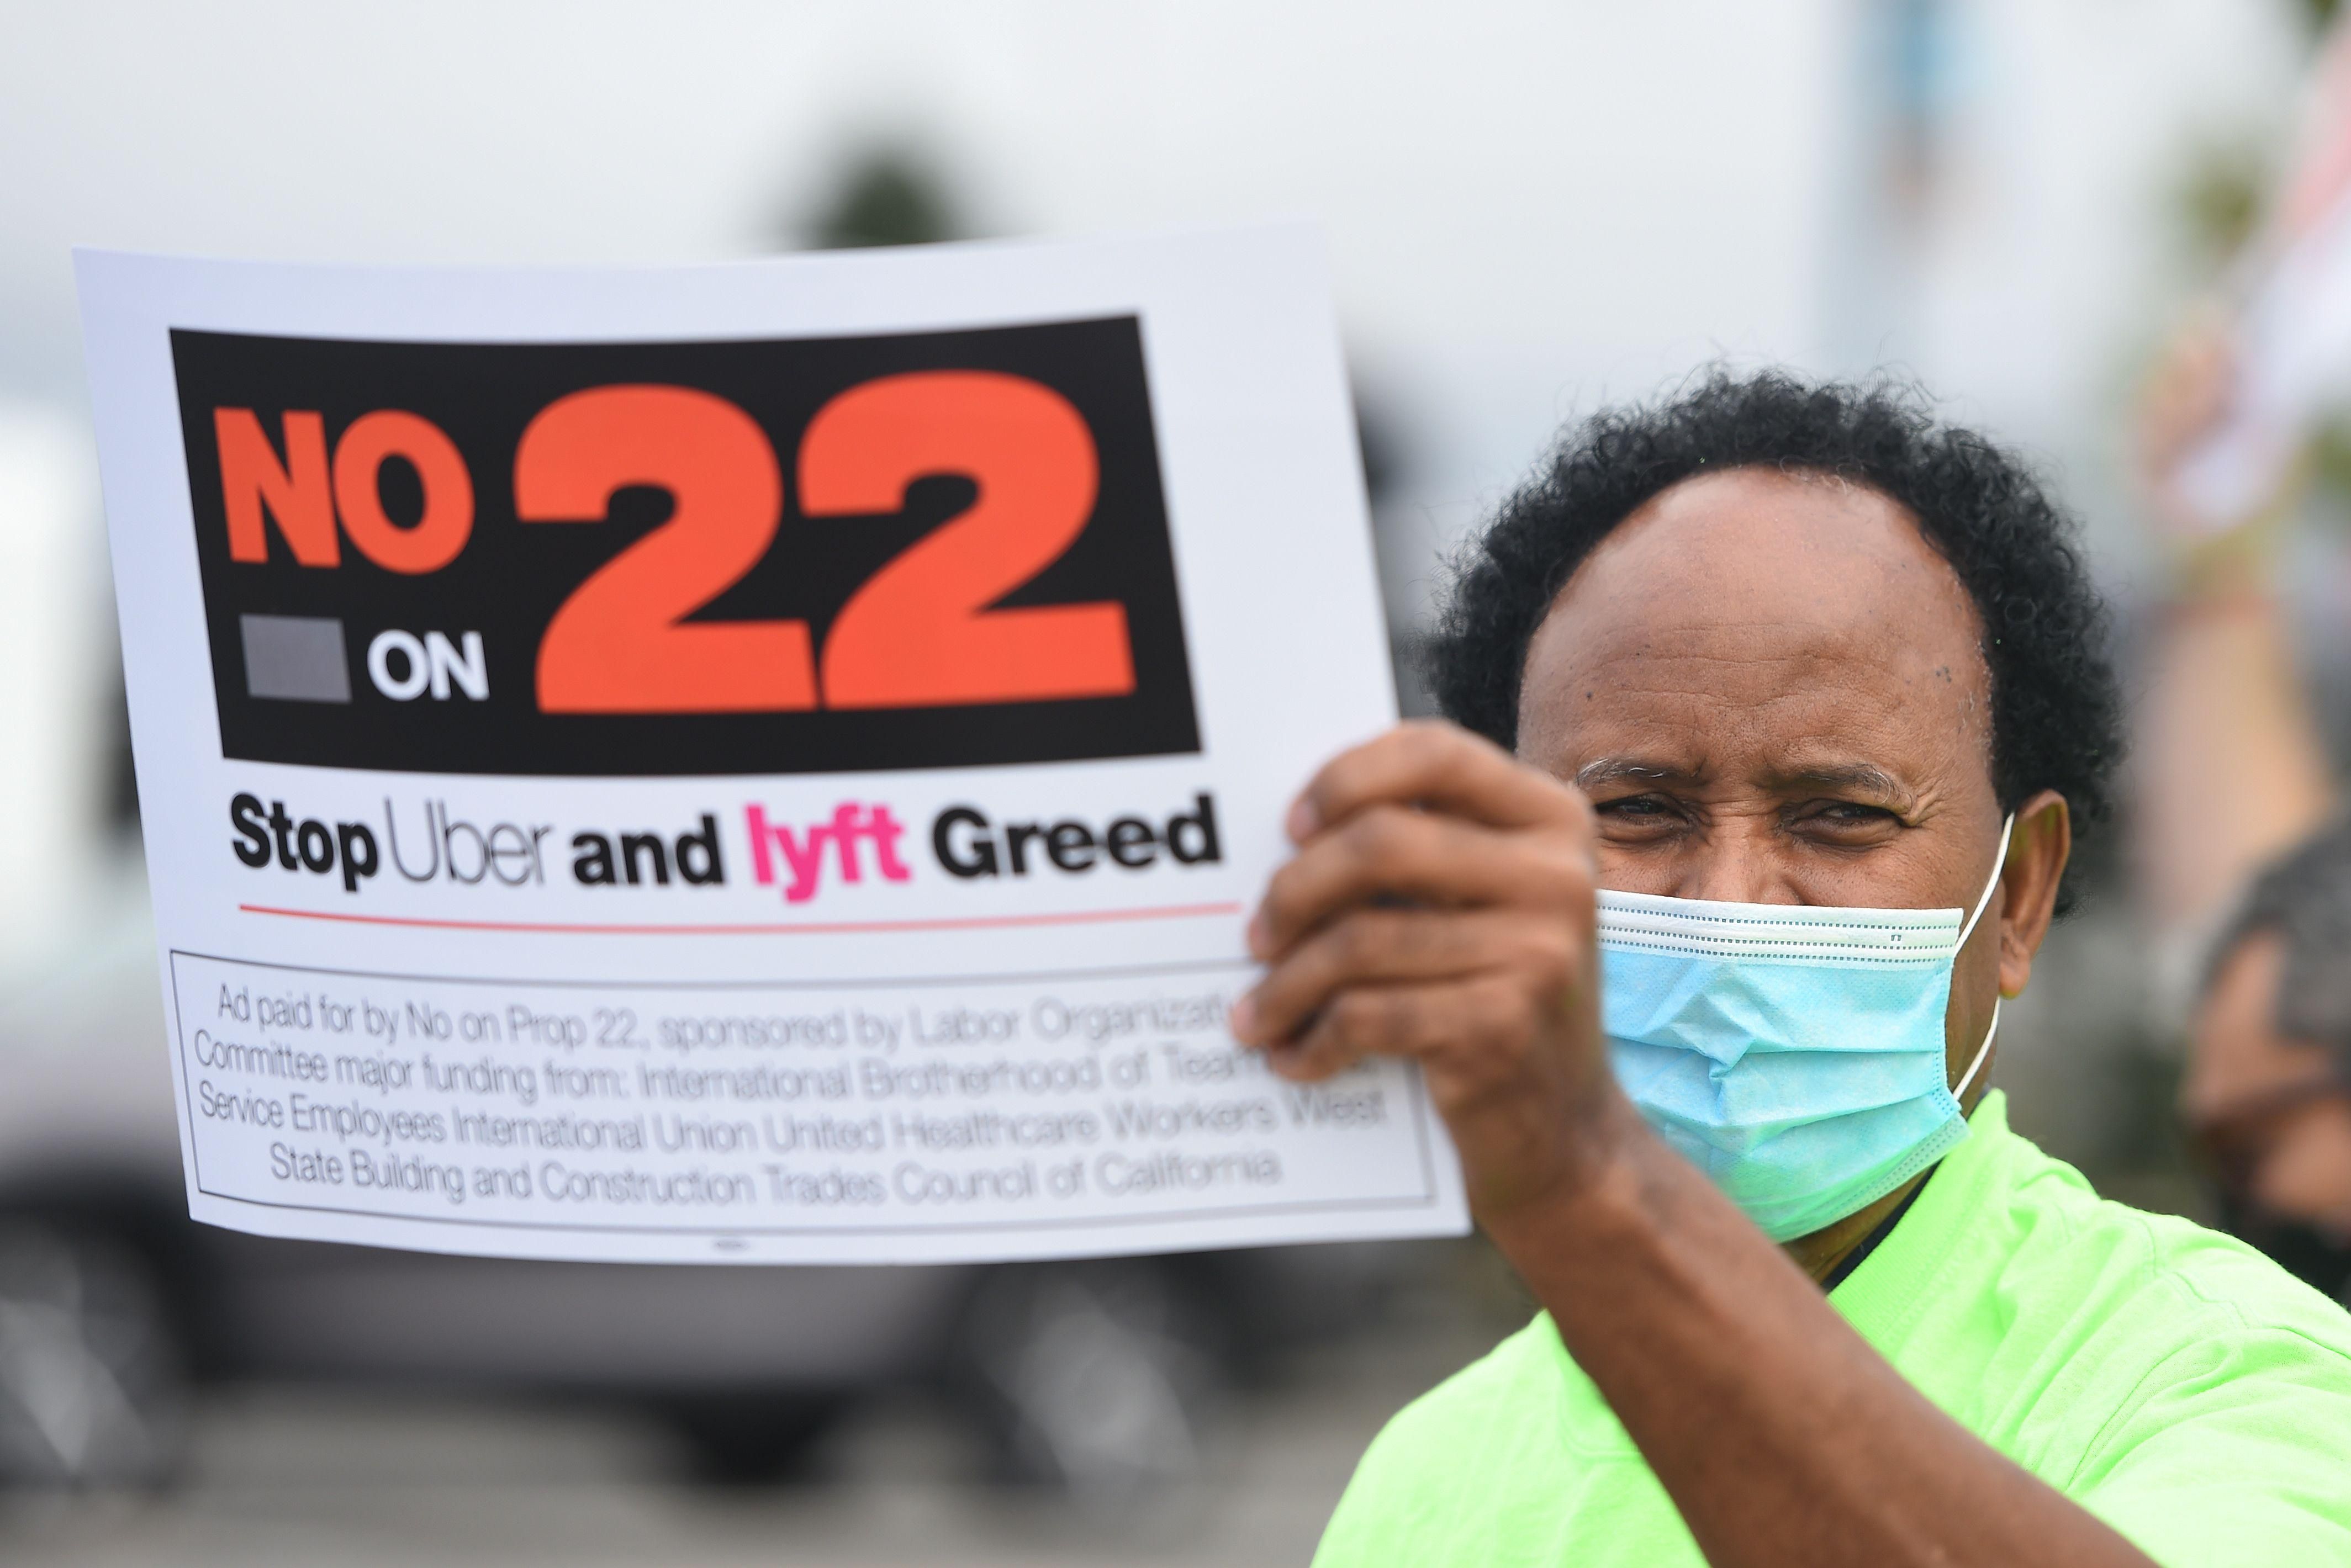 A rideshare driver holds up a sign supporting a 'No' vote on Prop 22 in Oakland, California on October 9, 2020. (Photo: Josh Edelson/AFP via Getty Images)